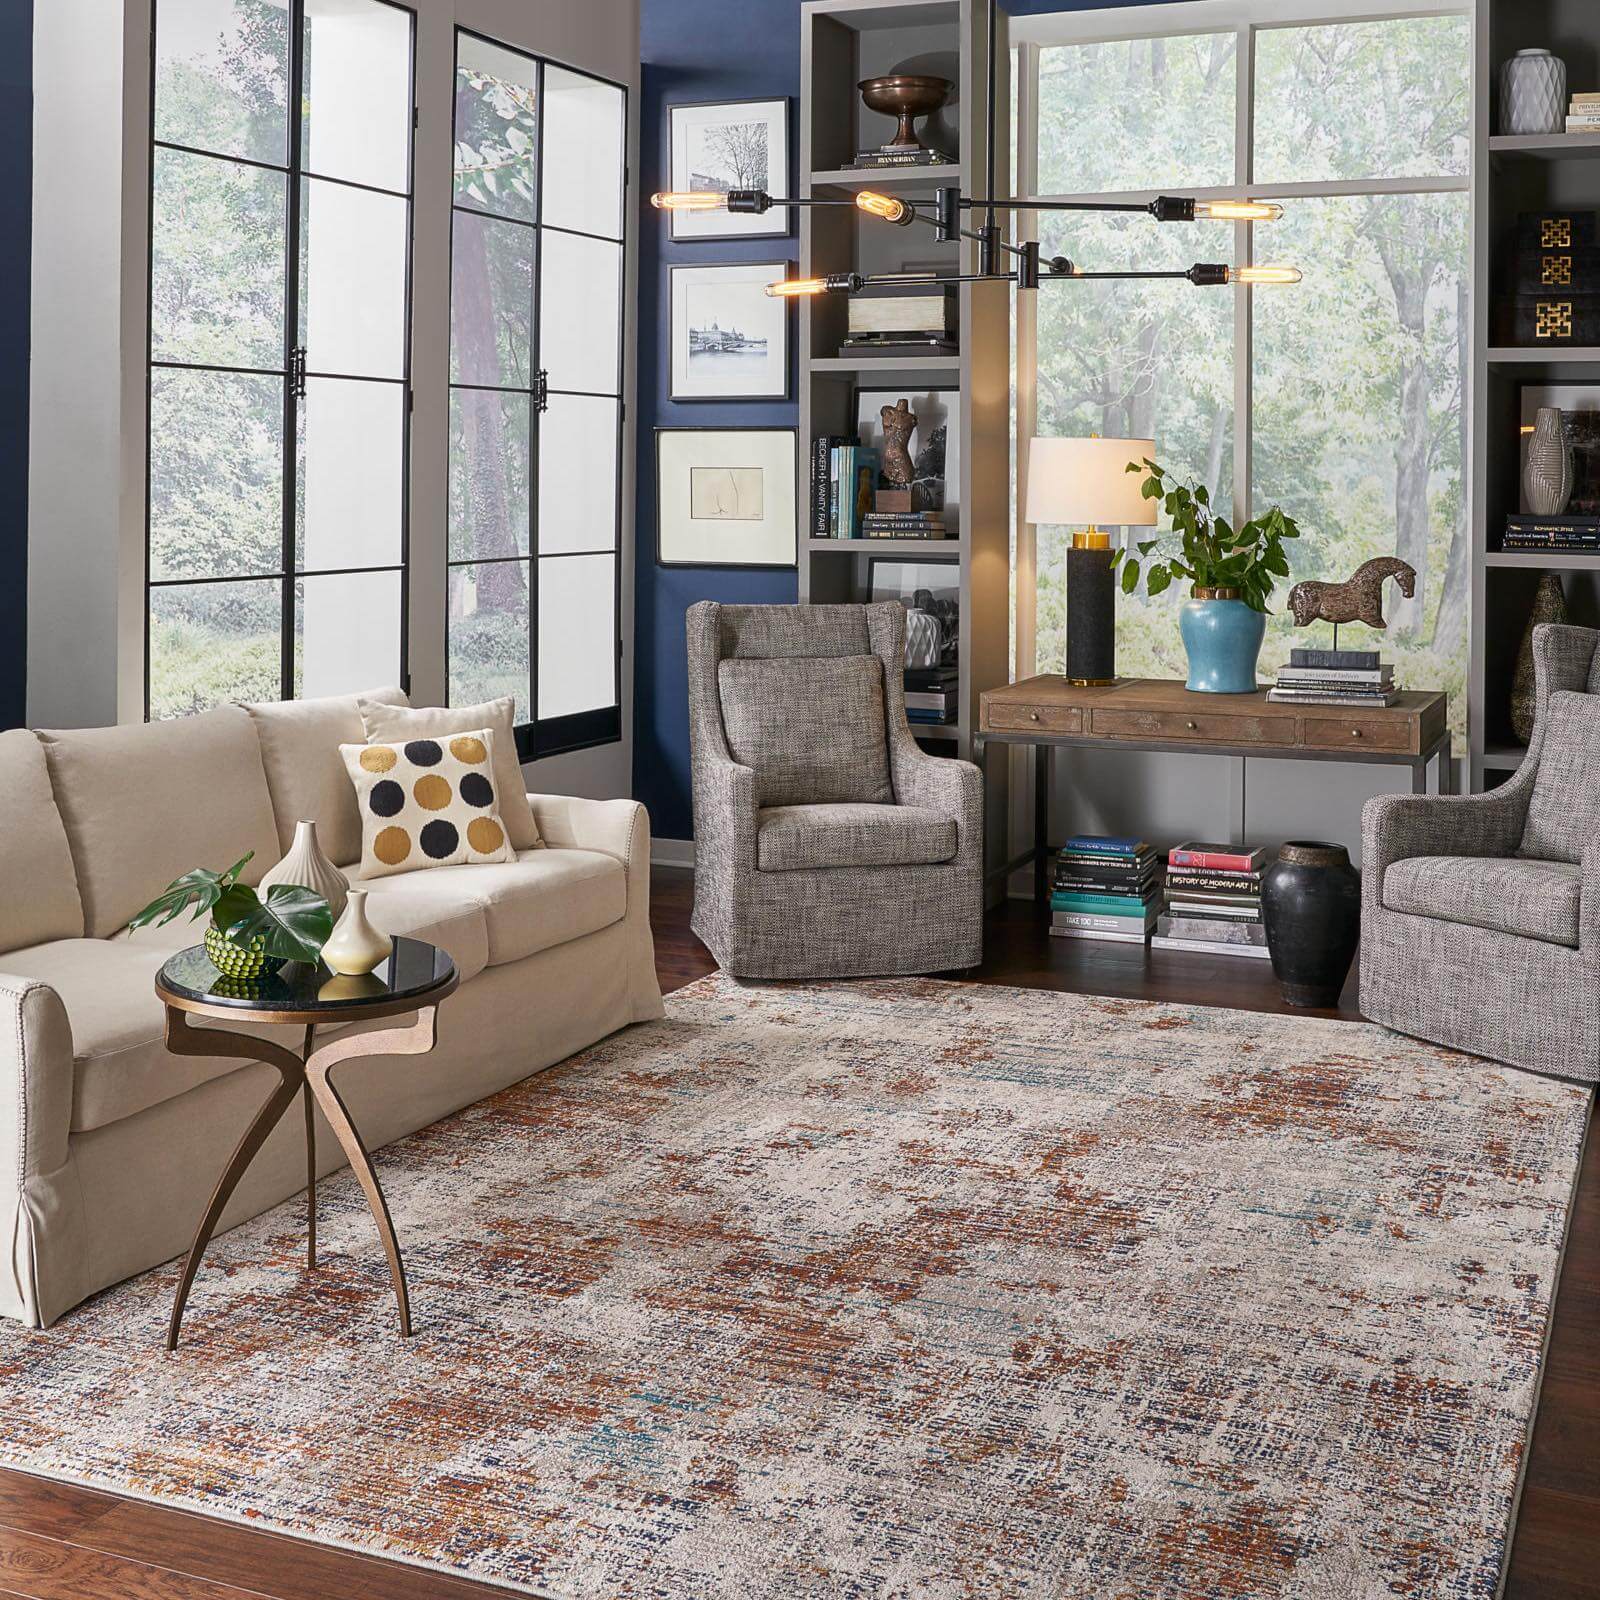 Living Room With Rug | Location Carpet